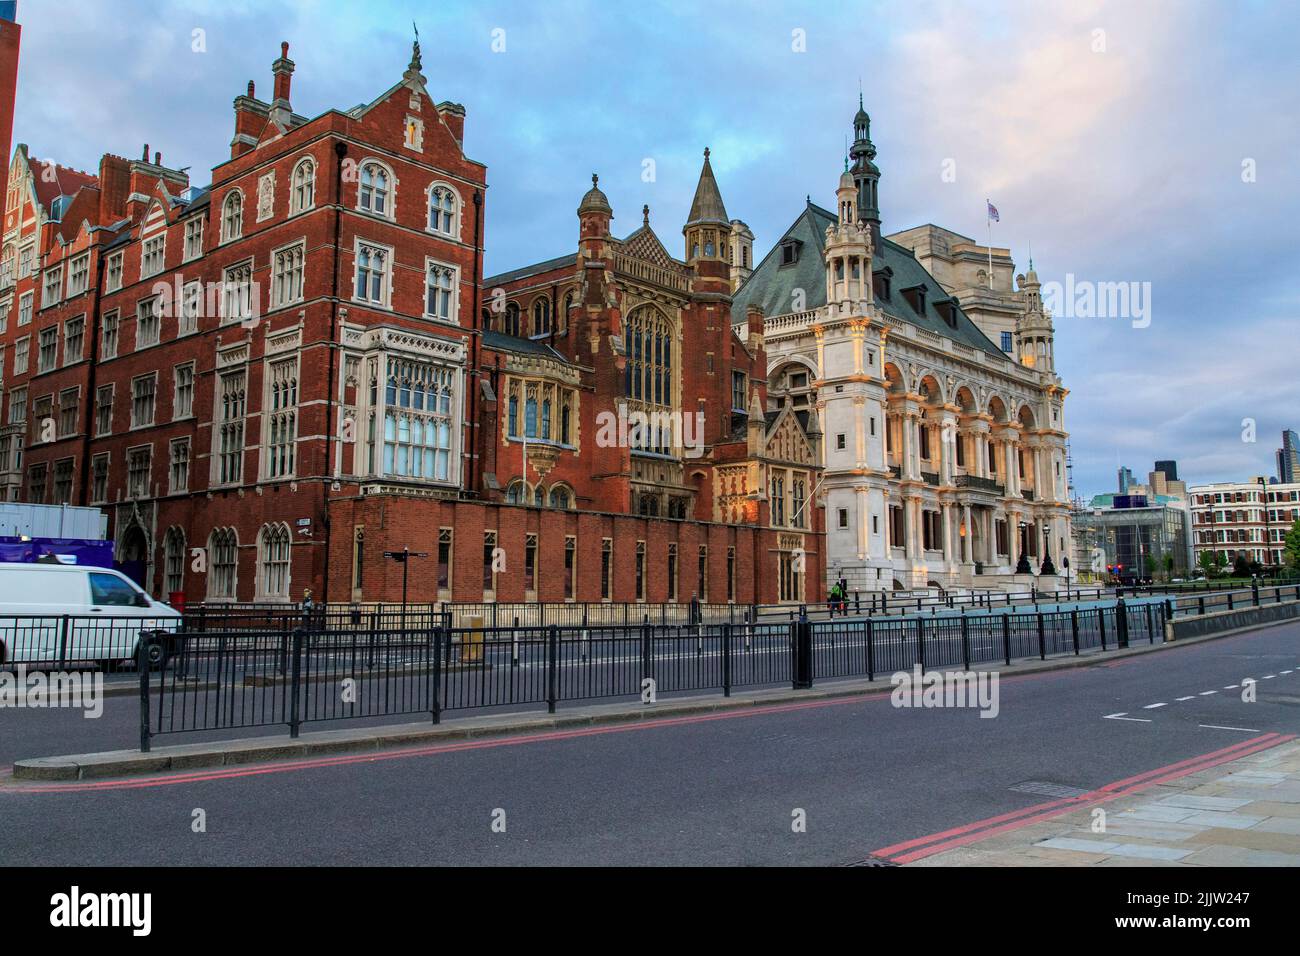 LONDON, GREAT BRITAIN - MAY 11, 2014: These are houses of the Vitorian neo-Gothic style on the Victoria Embankment. Stock Photo